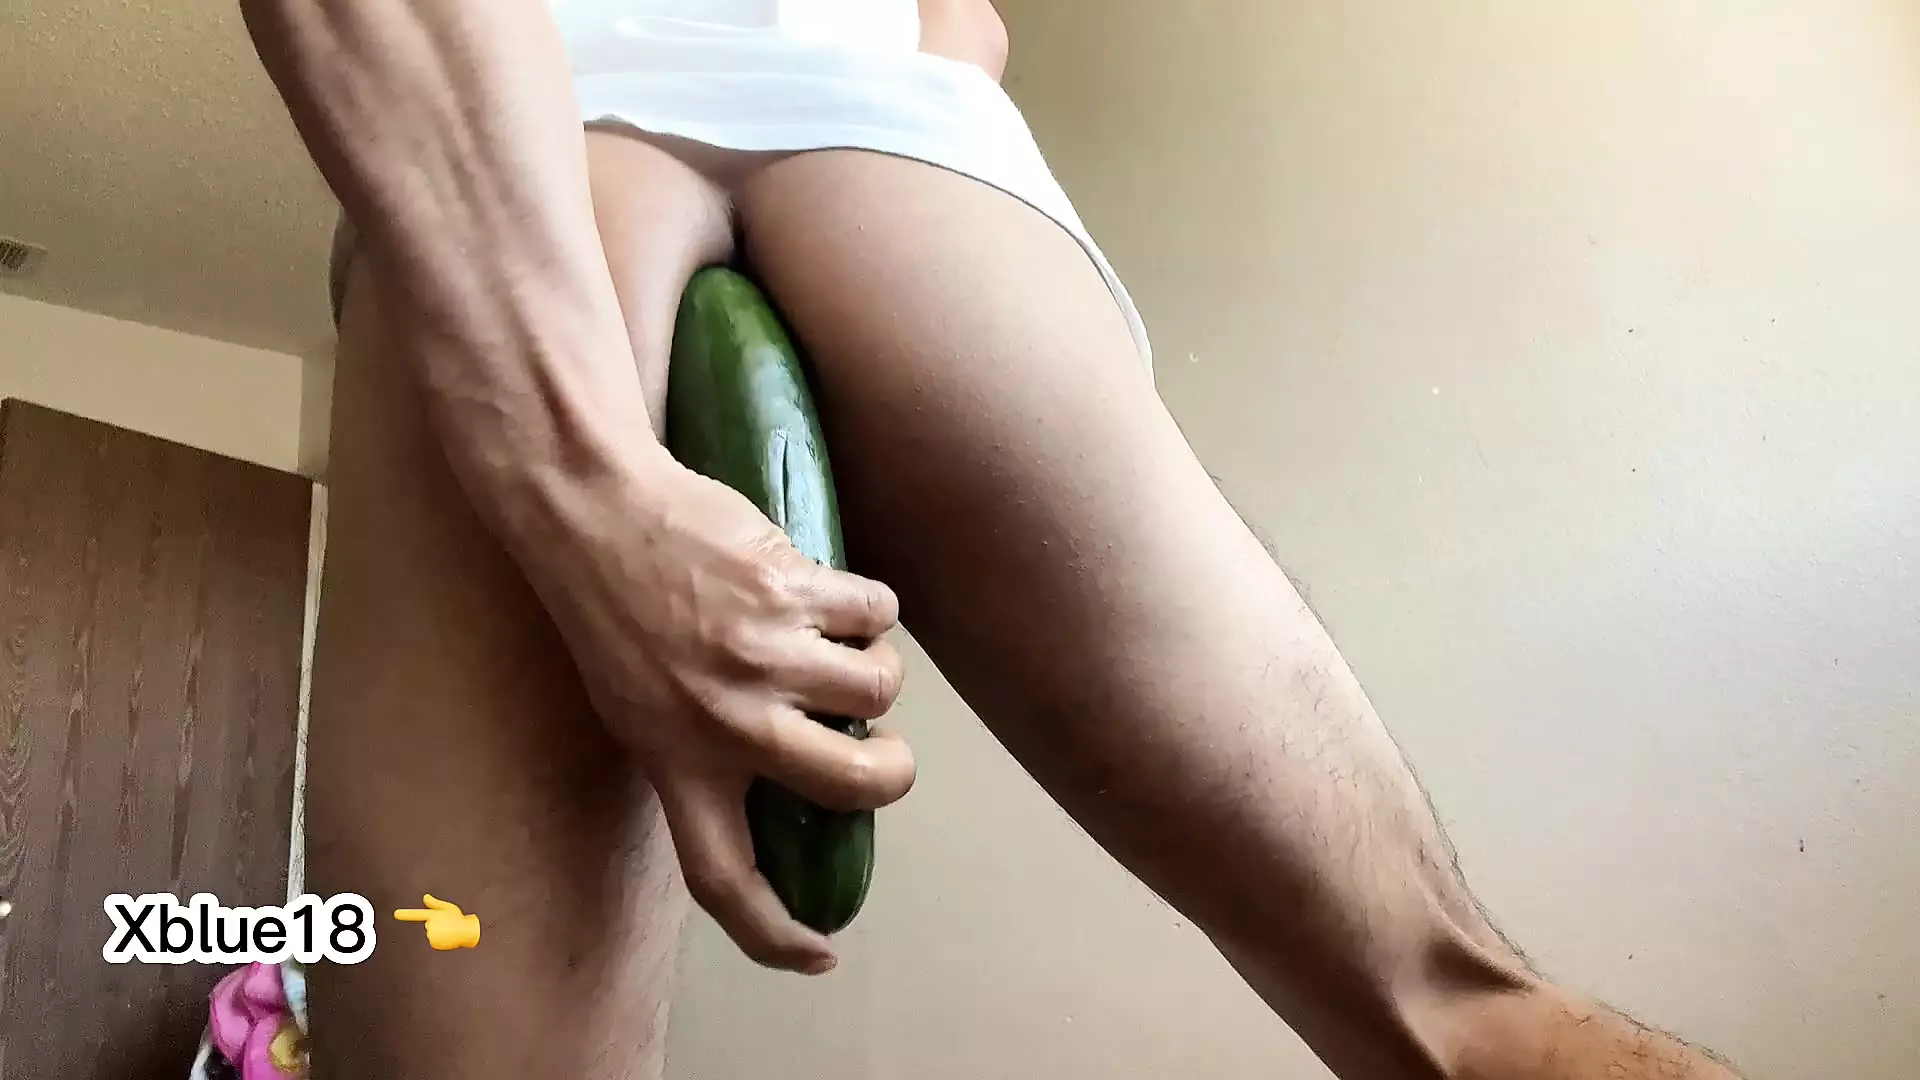 Youtupexxx - A huge cucumber penis inside my ass, compilation of the best porn videos  recorded by Xblue18 - XXXi.PORN Video